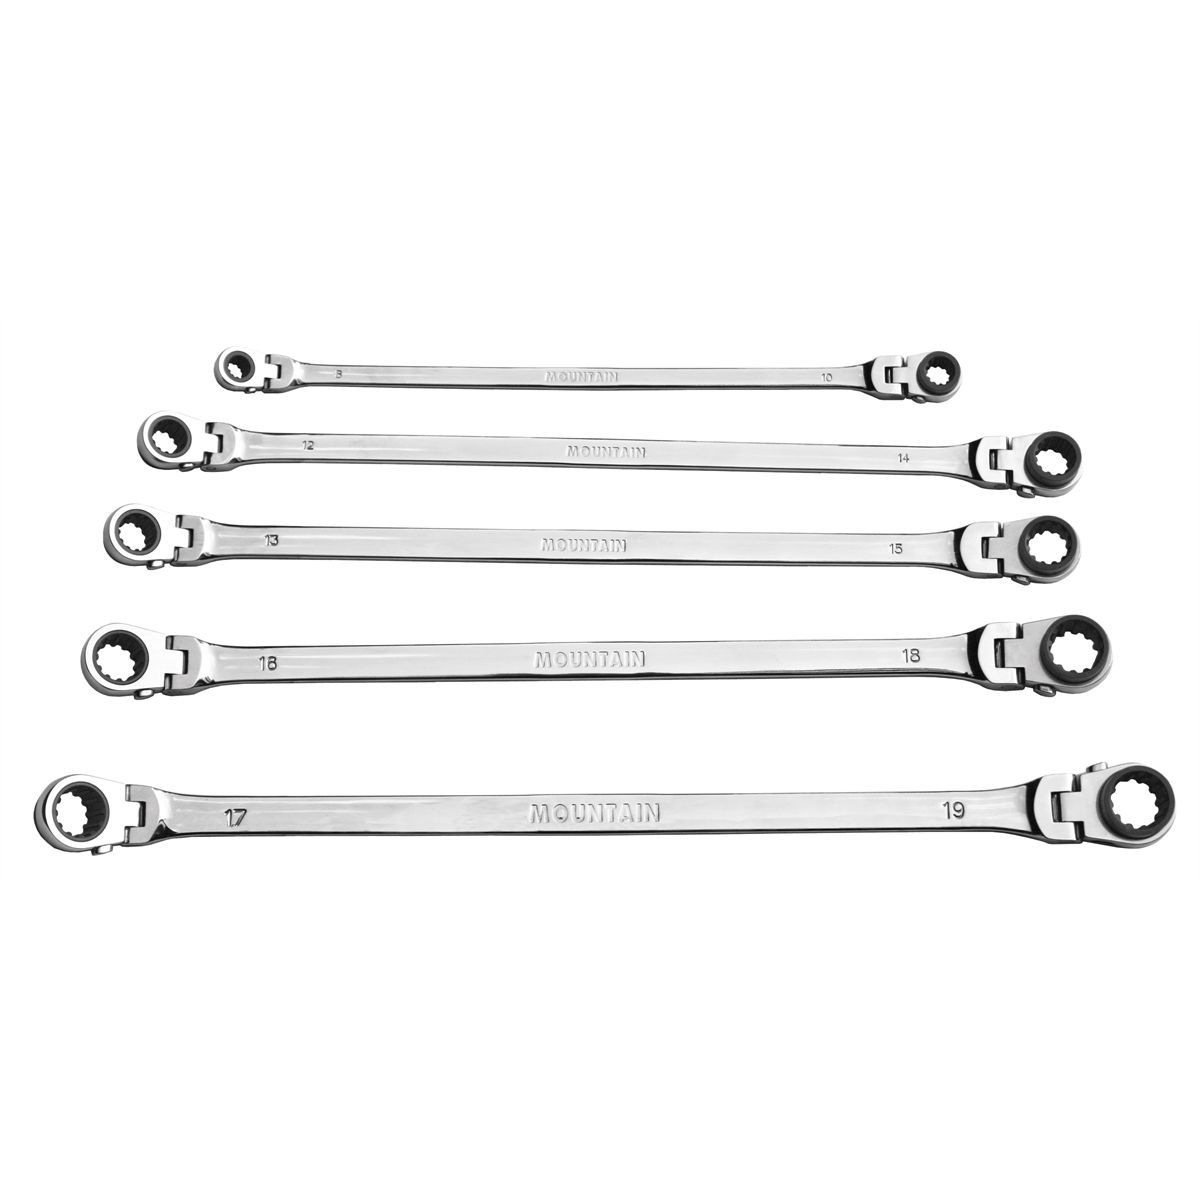 5-Piece Channellock Metric Open End Wrench Set 